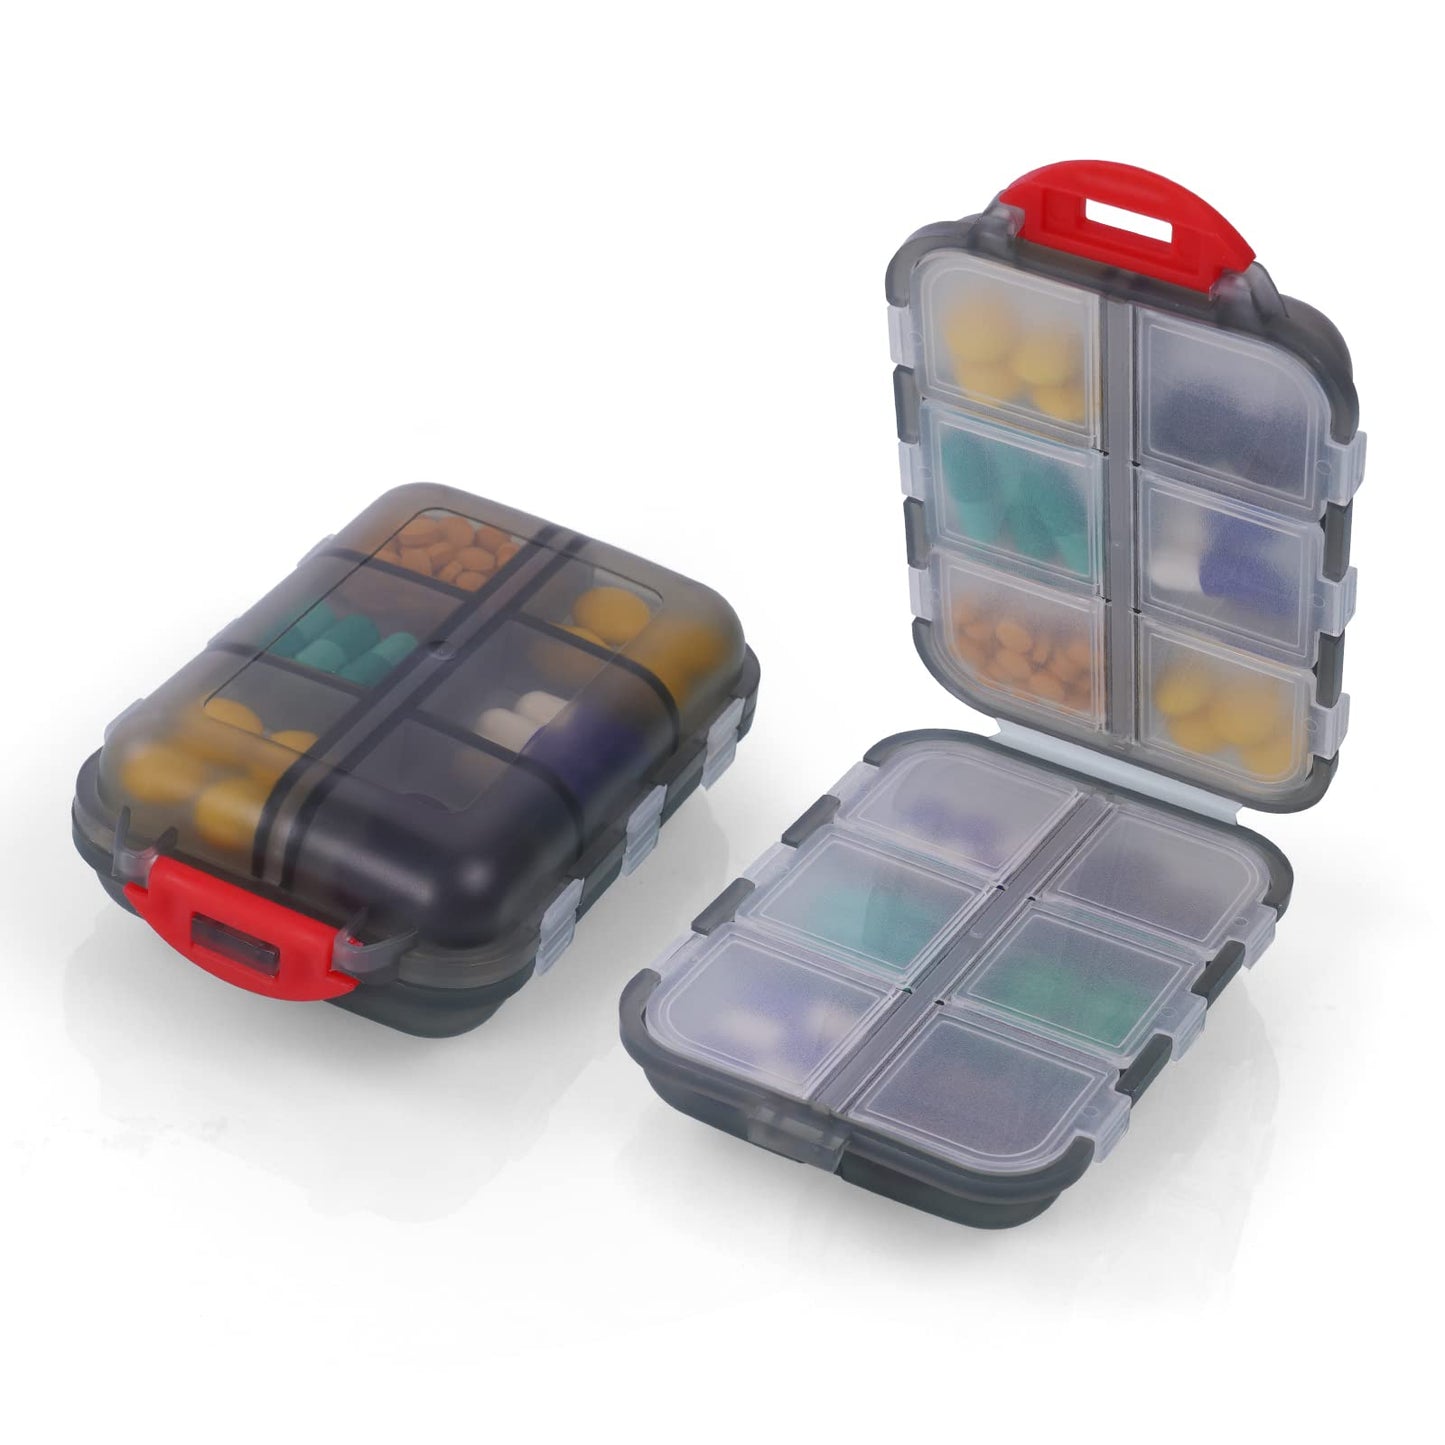 AOOWU Weekly Pill Box, 1 Piece Portable Travel Pill Box, Medicine Pills Organizer with 12 Compartments, Pill Box for Carrying Vitamins, Fish Oil and Medication (Grey)